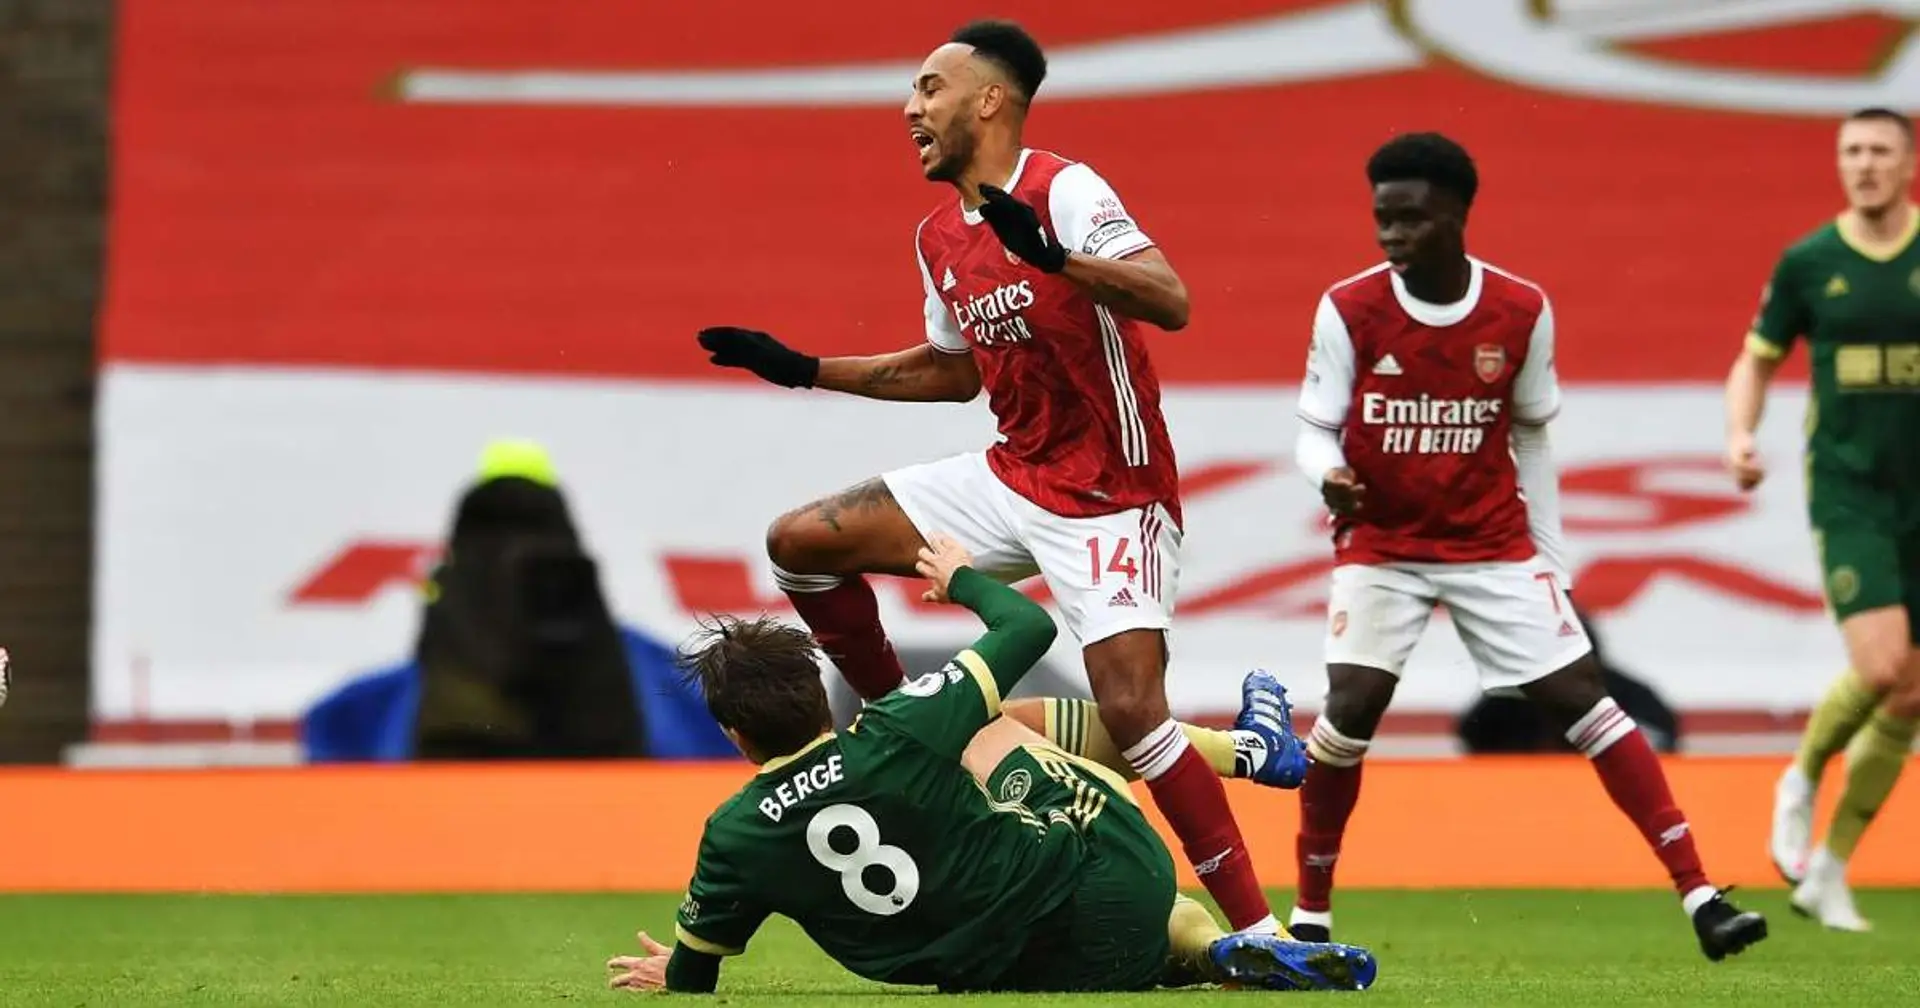 Aubameyang 'in care' over ankle sprain sustained vs Sheffield, Gabon coach Neveu confirms